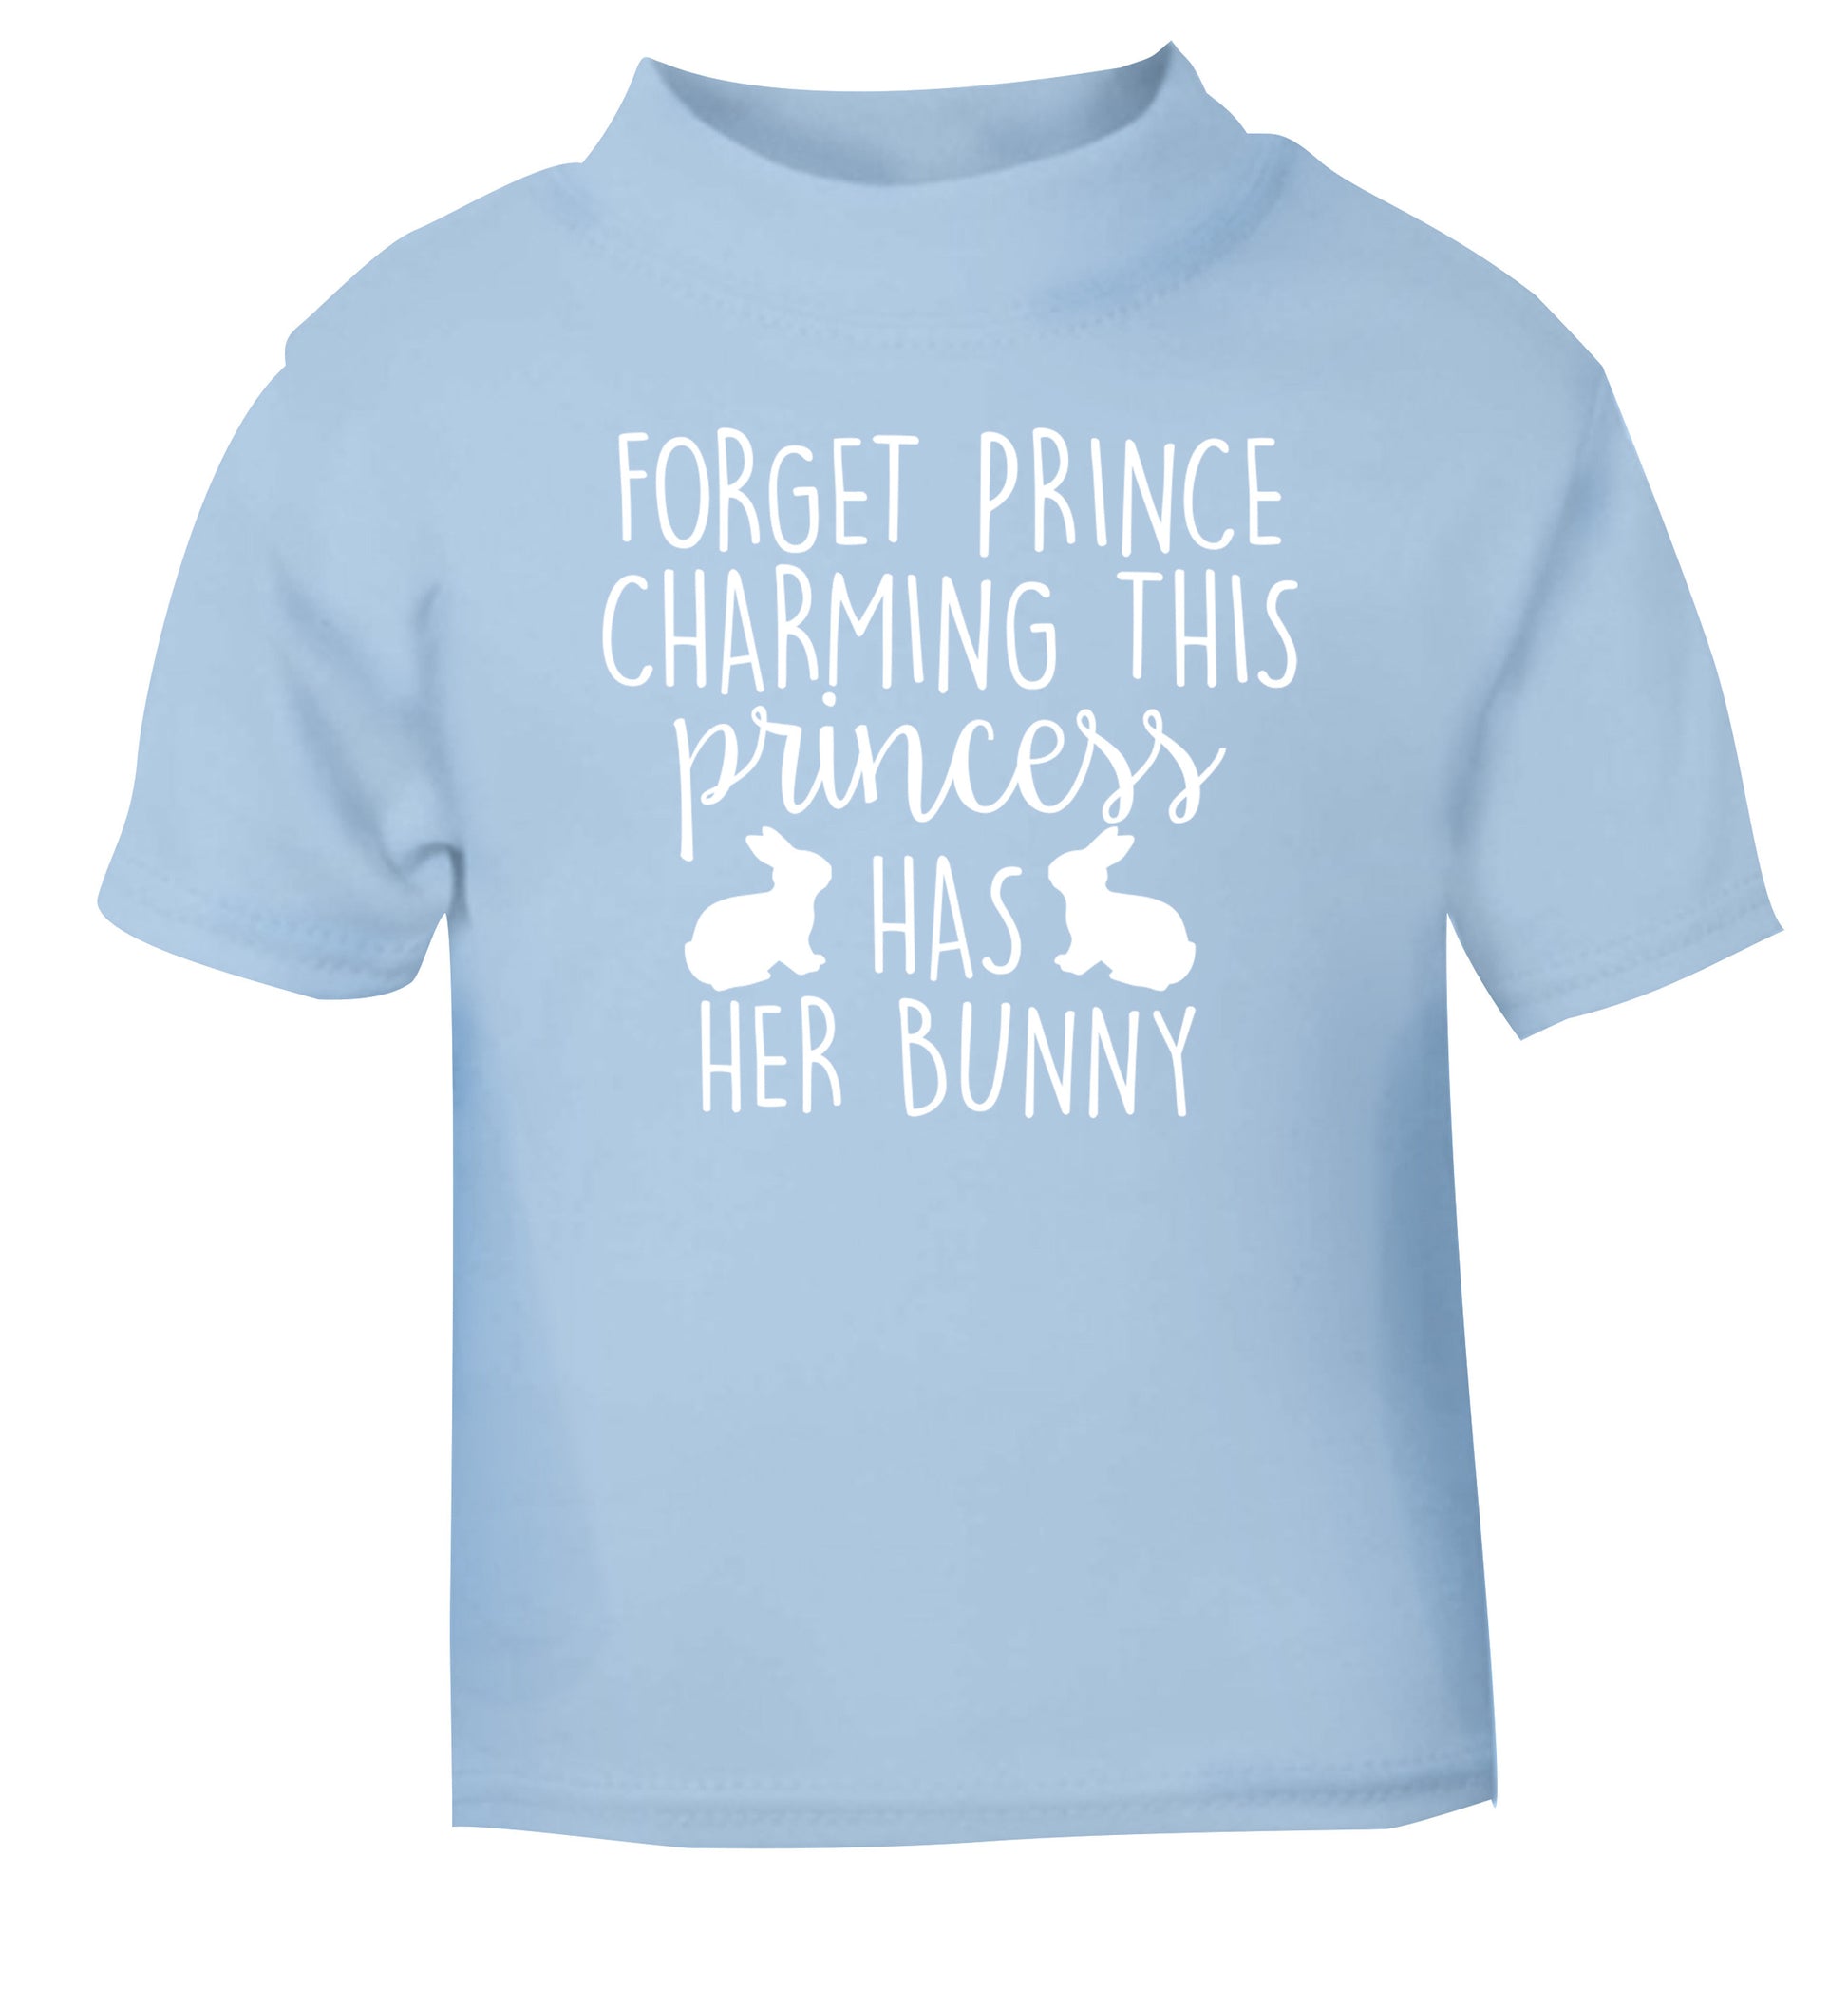 Forget prince charming this princess has her bunny light blue Baby Toddler Tshirt 2 Years